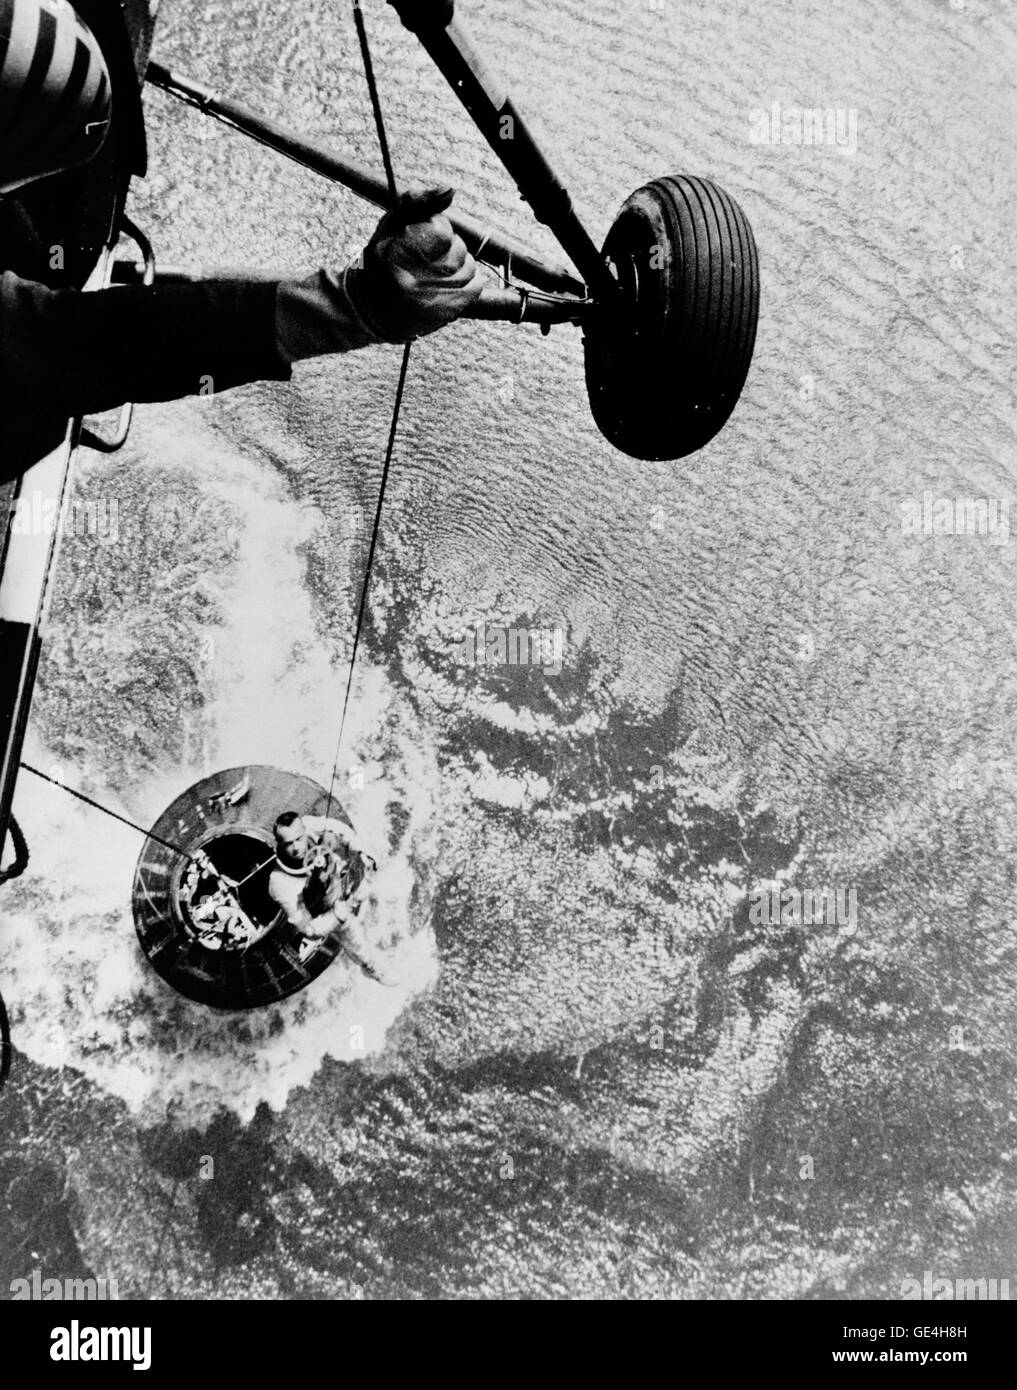 Astronaut Alan B. Shepard Jr., pilot of the Mercury-Redstone 3 (MR-3) suborbital spaceflight, is retrieved by a helicopter from the USS Lake Champlain during recovery operations in the western Atlantic Ocean. Shepard and the Mercury spacecraft designated the &quot;Freedom 7&quot; (floating in water below) were flown to the deck of the recovery ship within 11 minutes of splashdown. MR-3 was the first American human space mission. The spacecraft attained a maximum speed of 5,180 miles per hour, reached an altitude of 116 1/2 statute miles, and landed 302 statute miles downrange from Cape Canaver Stock Photo